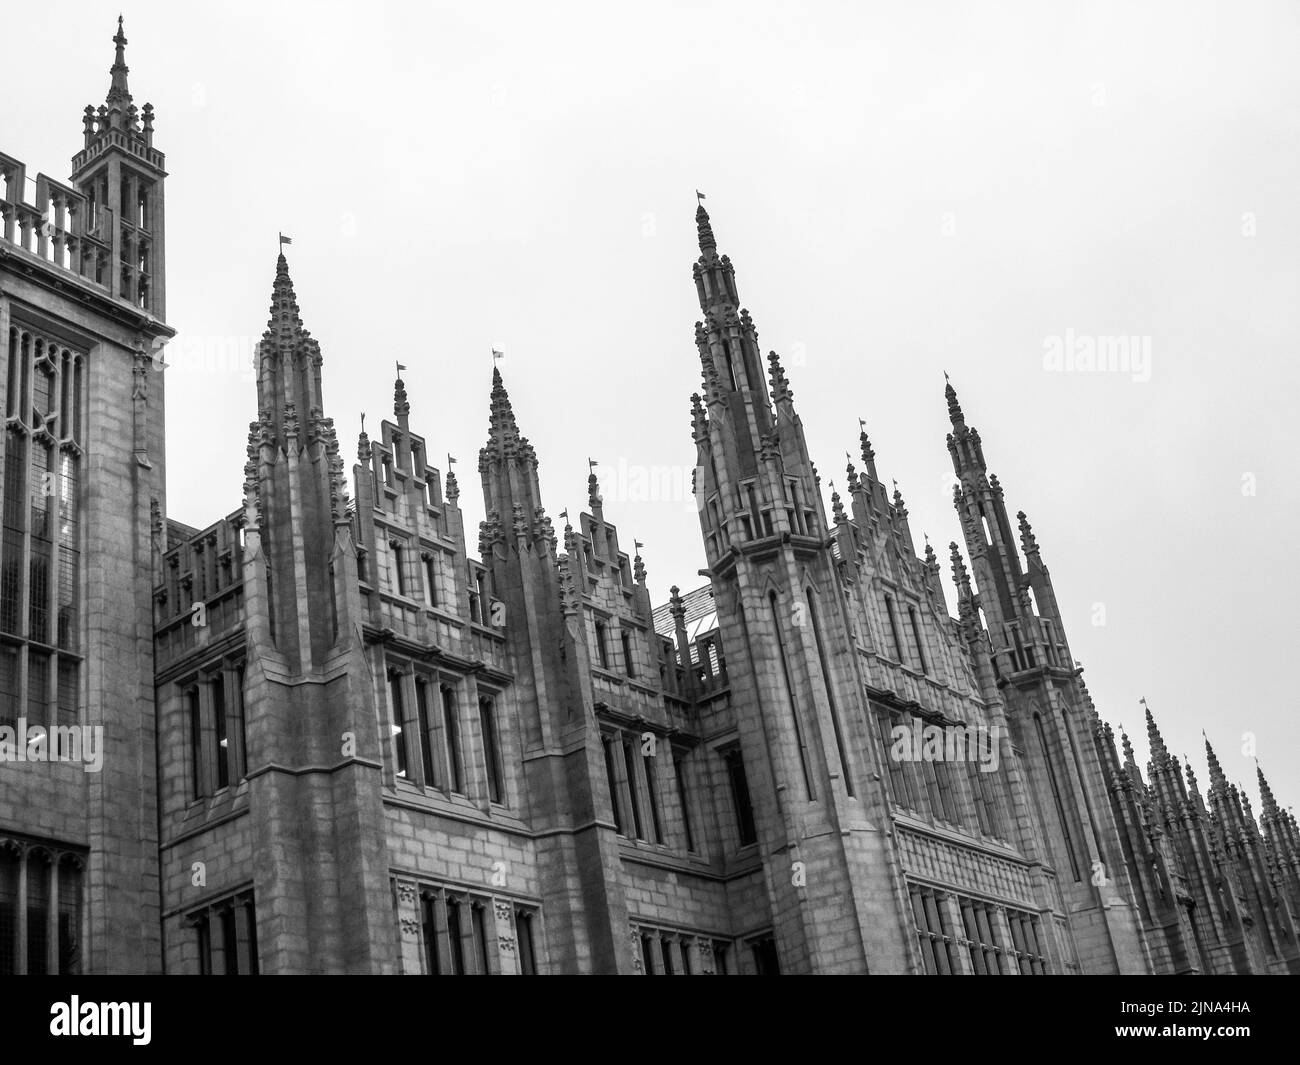 The detailed granite carved spires of Mariscal collage in the city of Aberdeen Scotland in black and white Stock Photo